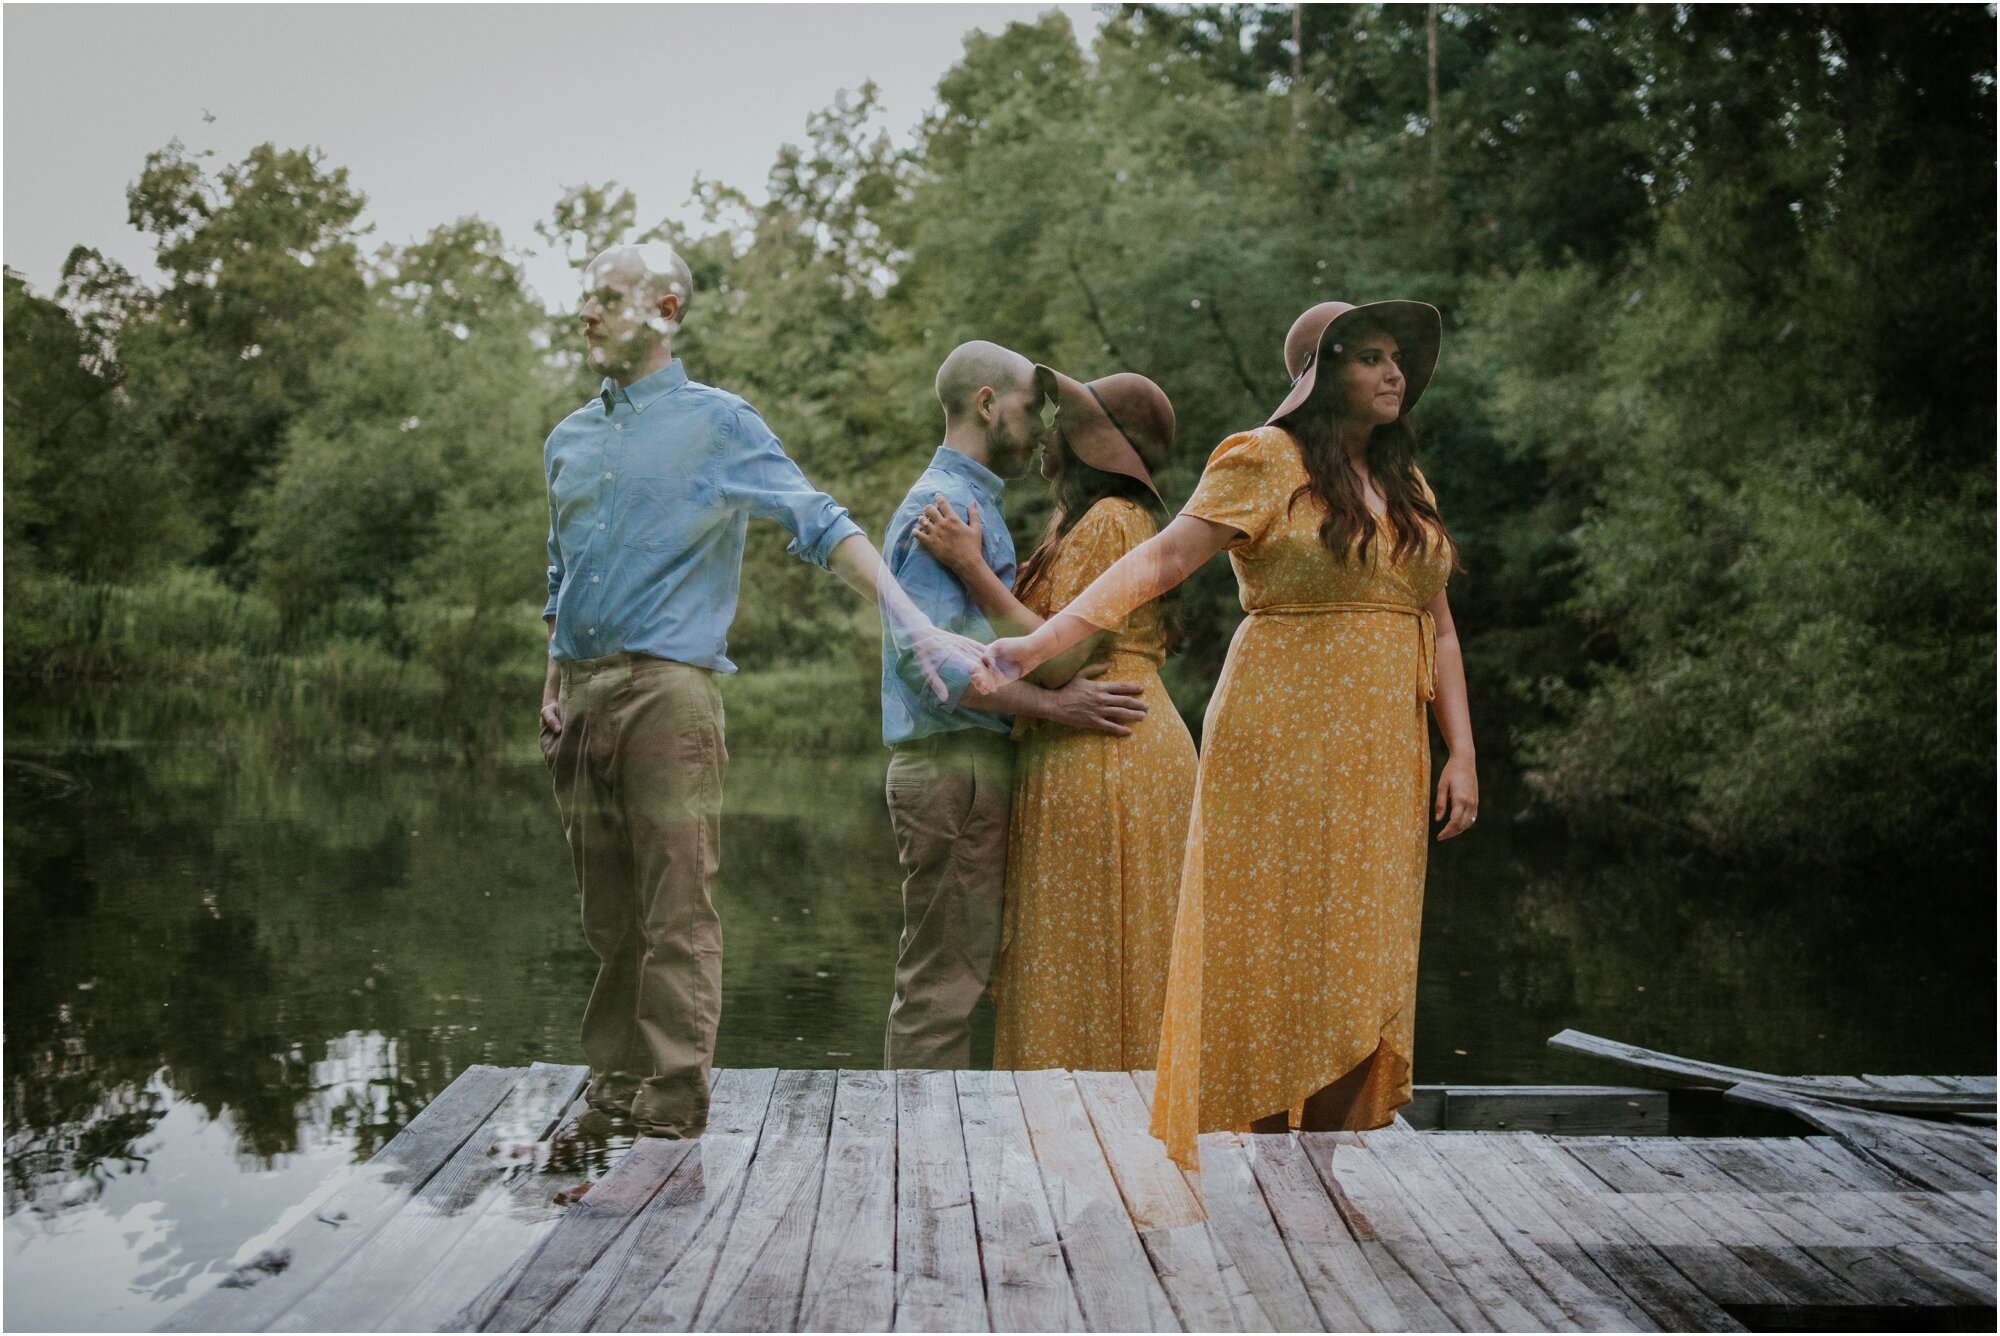 kingsport-tennessee-backyard-pond-bays-mountain-summer-engagement-session_0051.jpg